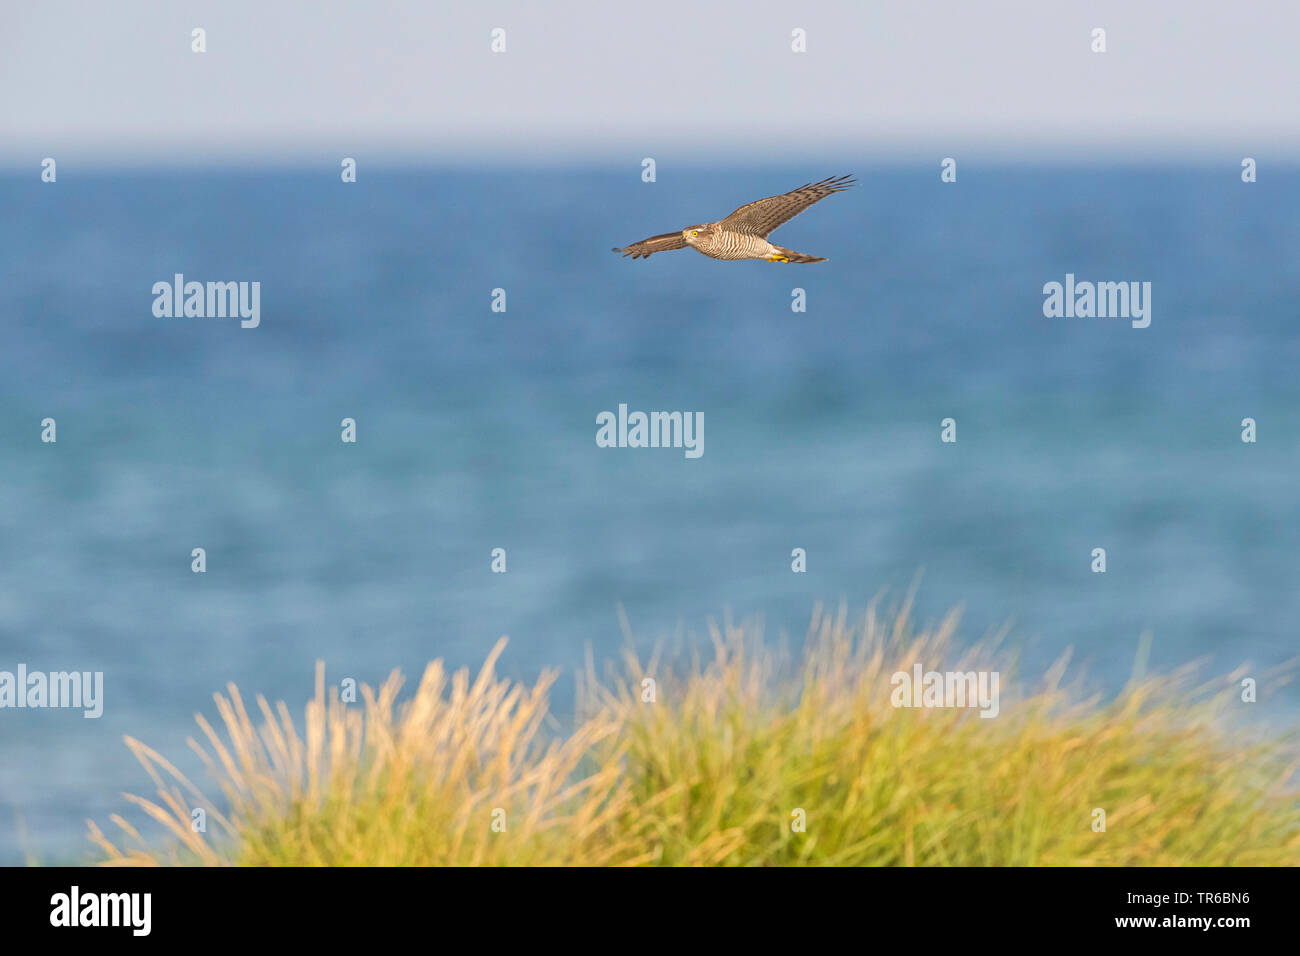 northern sparrow hawk (Accipiter nisus), flying, Sweden, Falsterbo Stock Photo